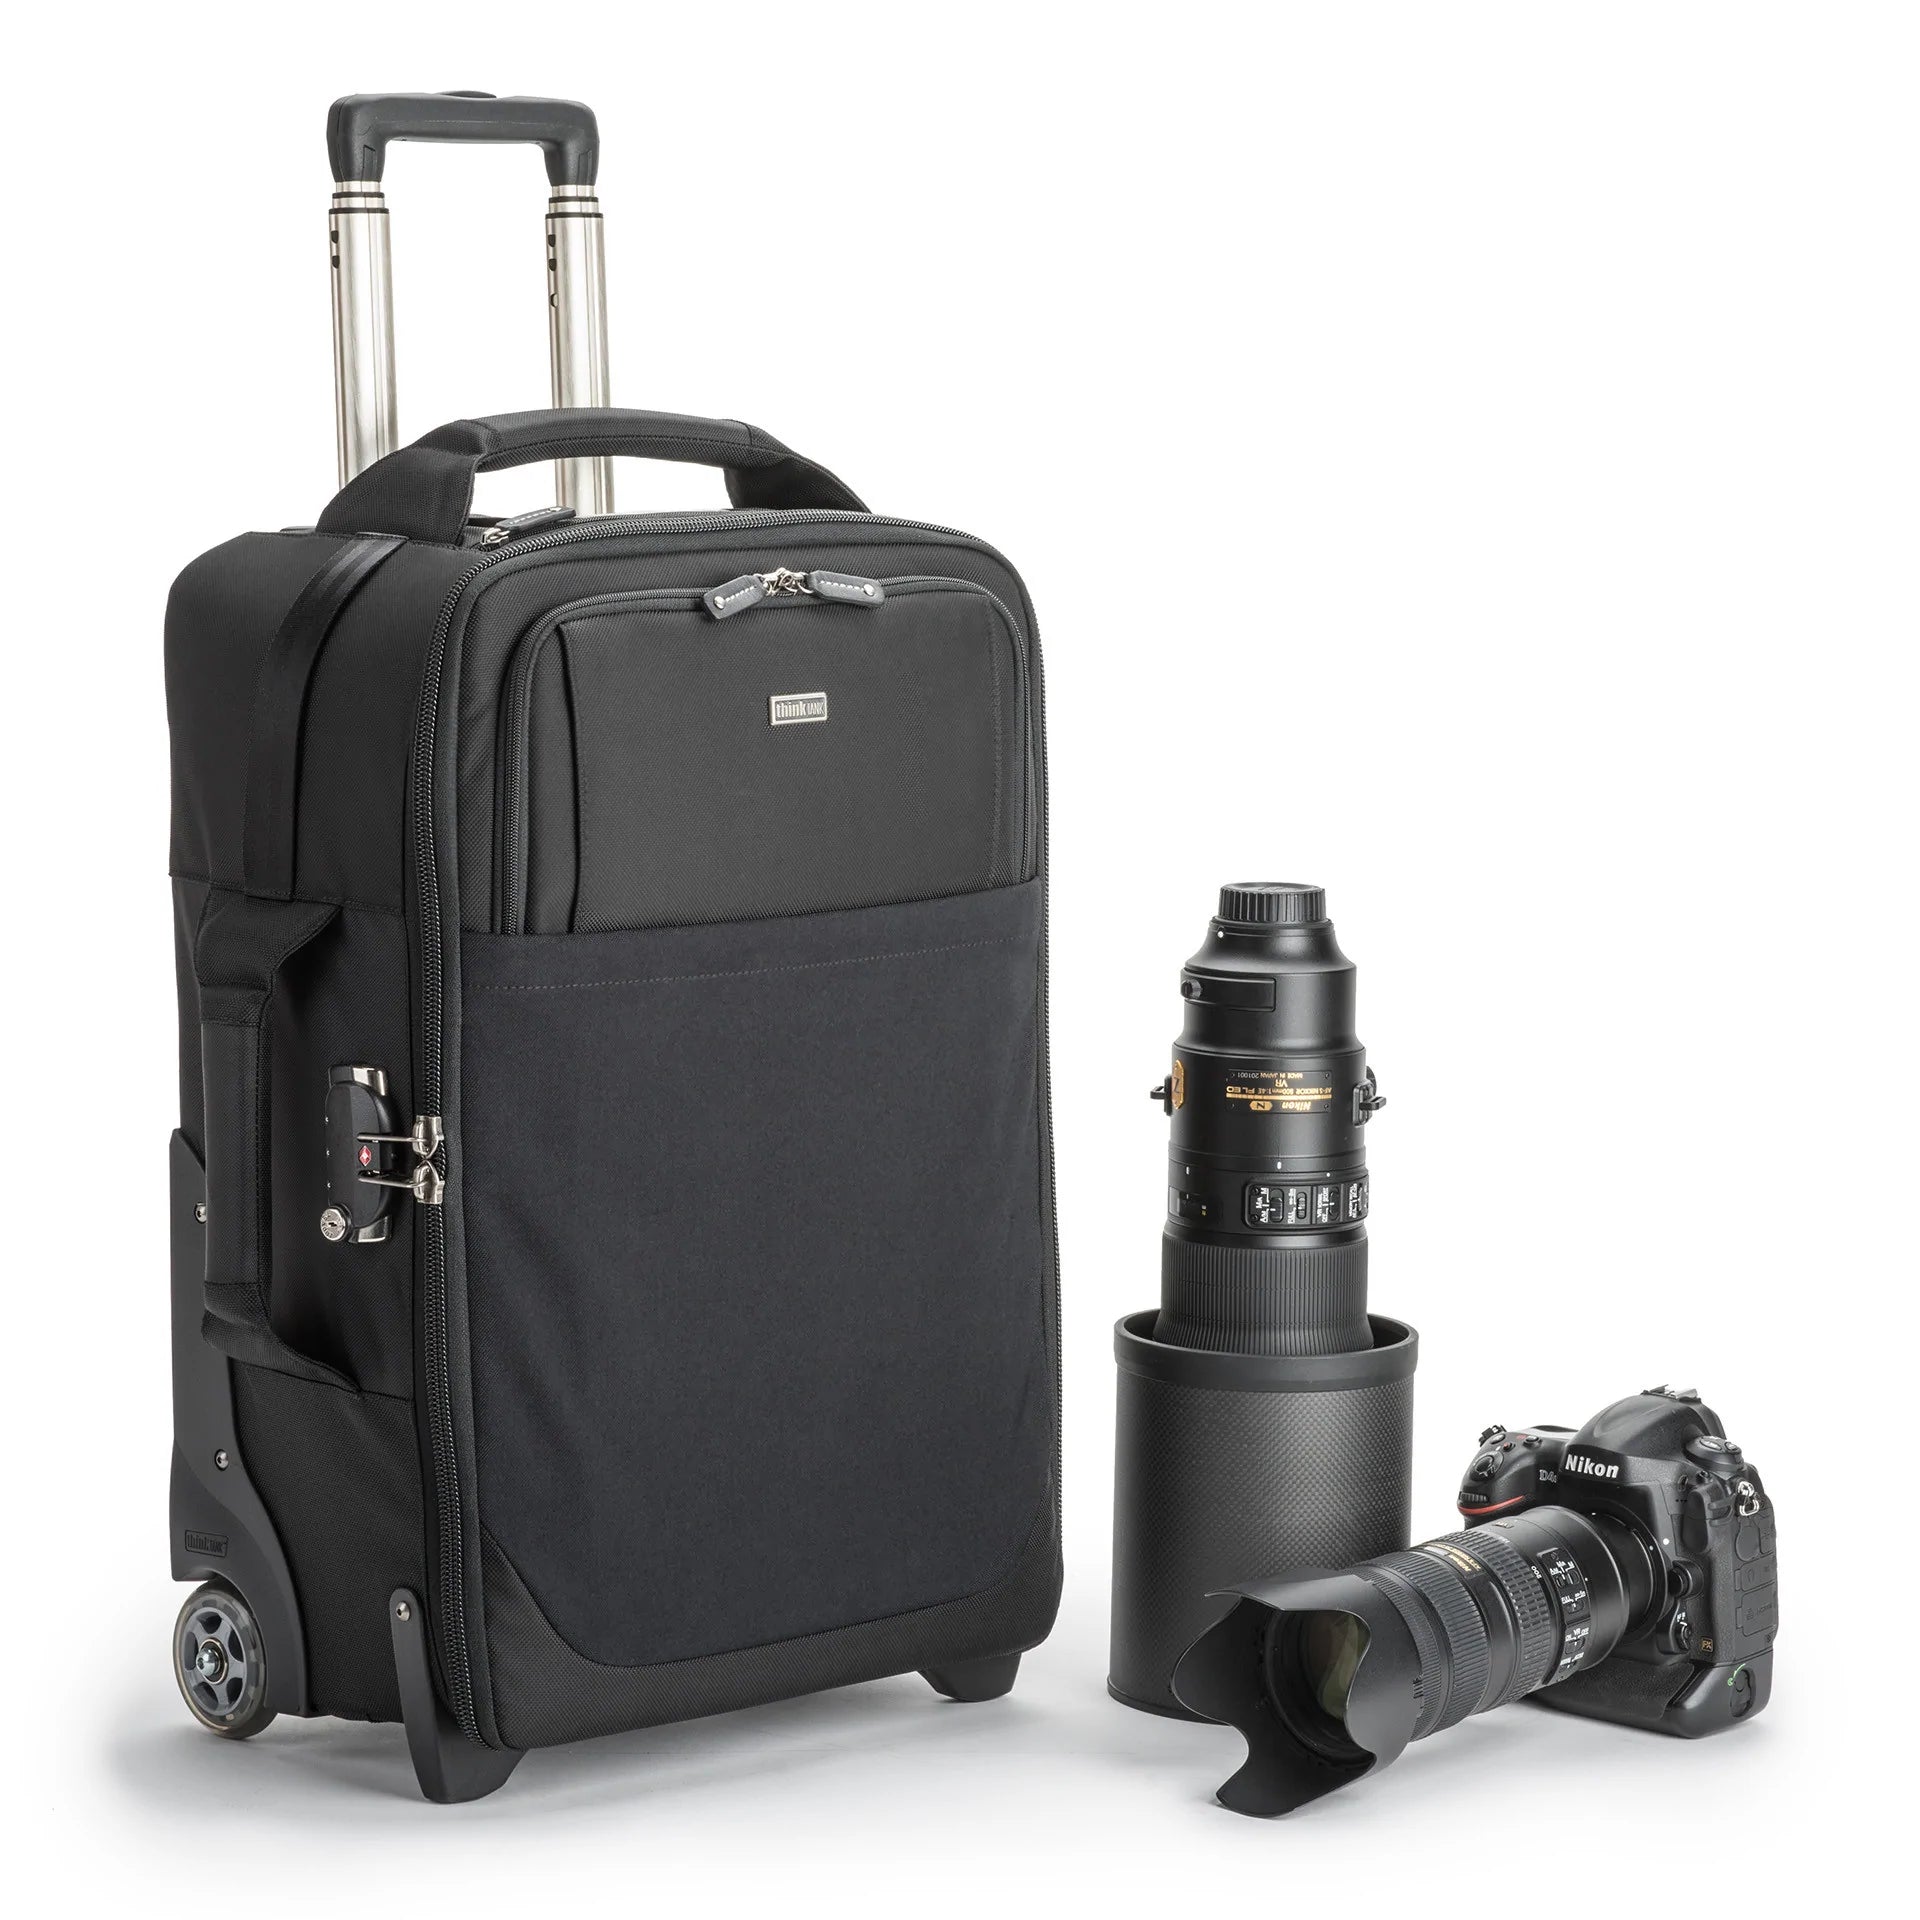 Product Image of Think Tank Photo Airport Security V3.0 Carry On Camera bag (Black)